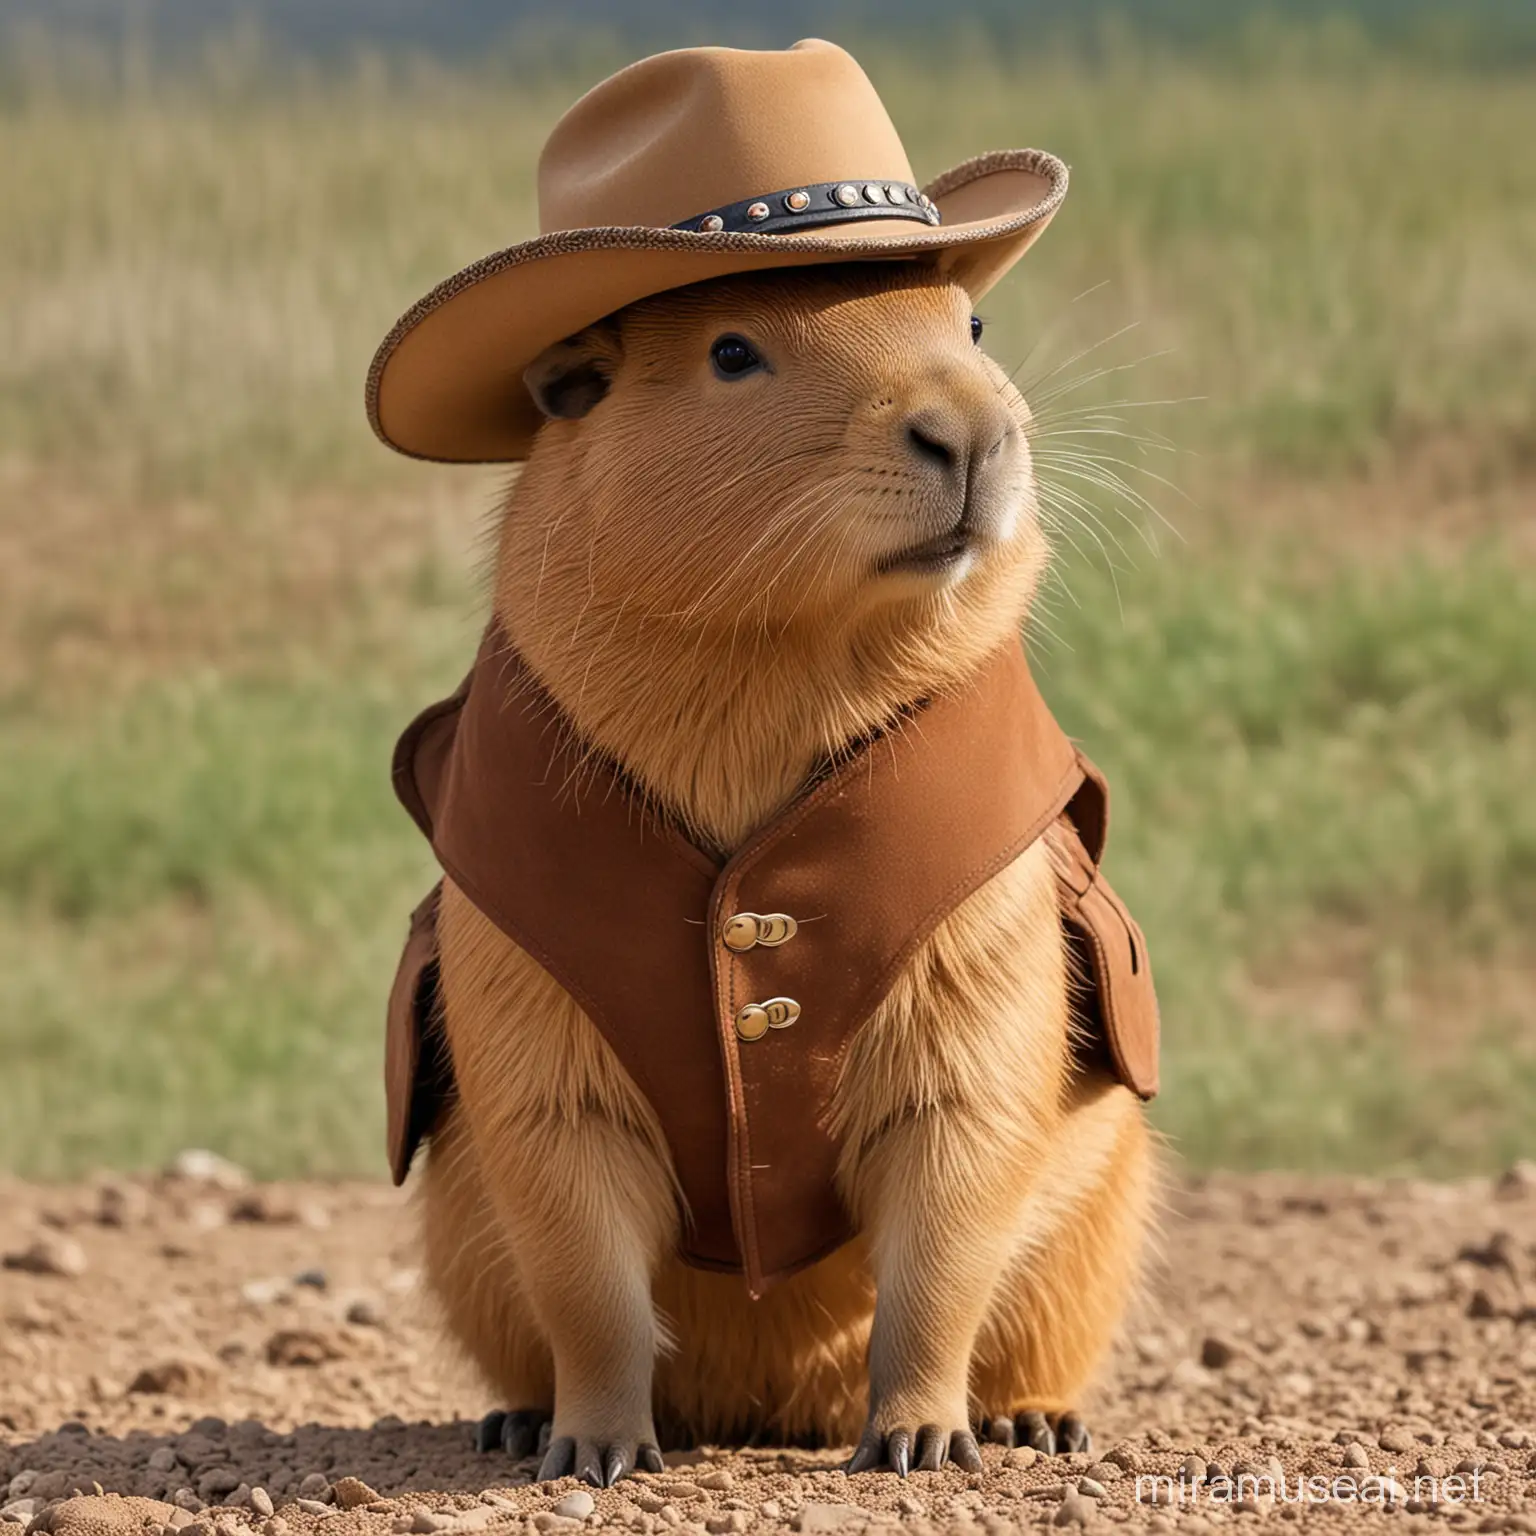 Cute Capybara in Western Attire Adorable Rodent Dons Cowboy Vest and Hat